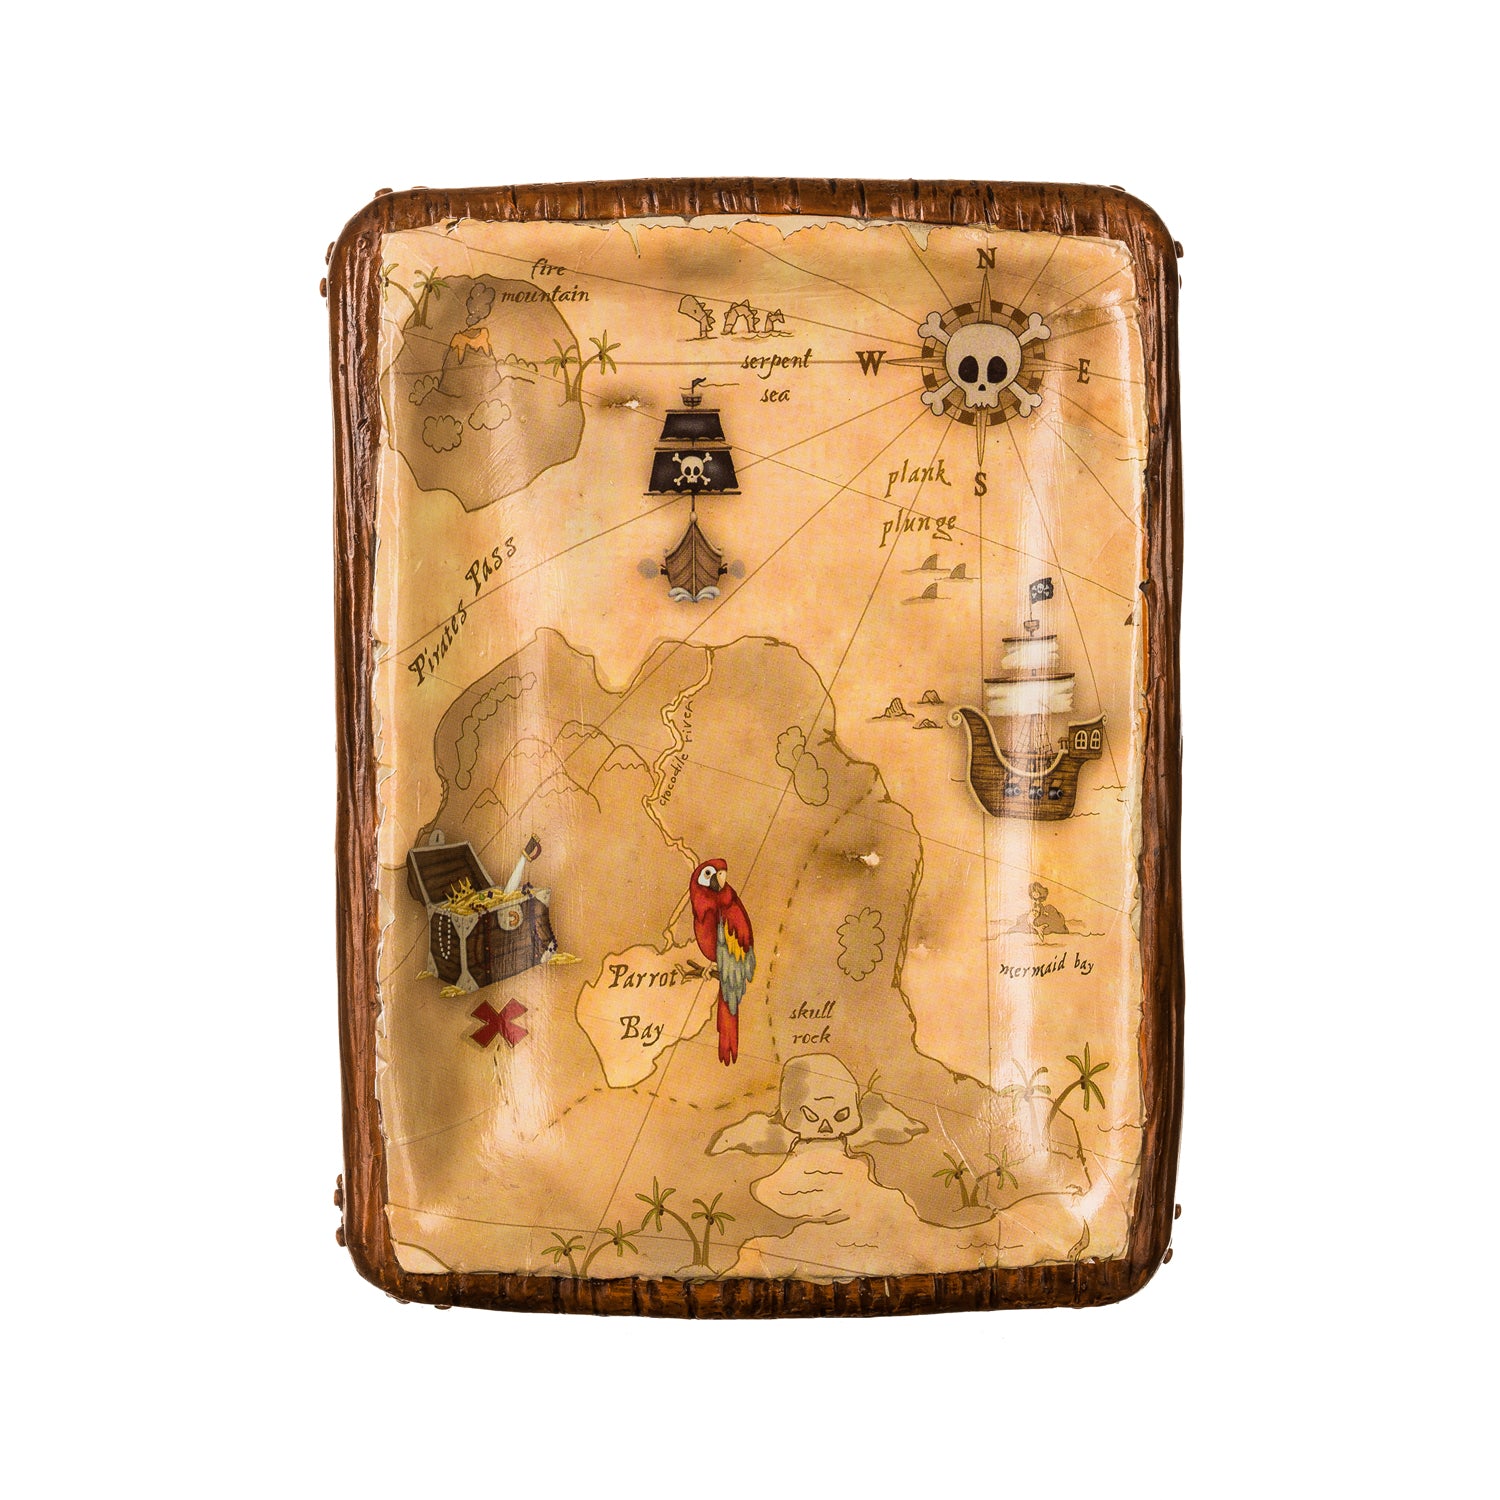 Borders Unlimited Pirate's Treasure Map Shower Curtain